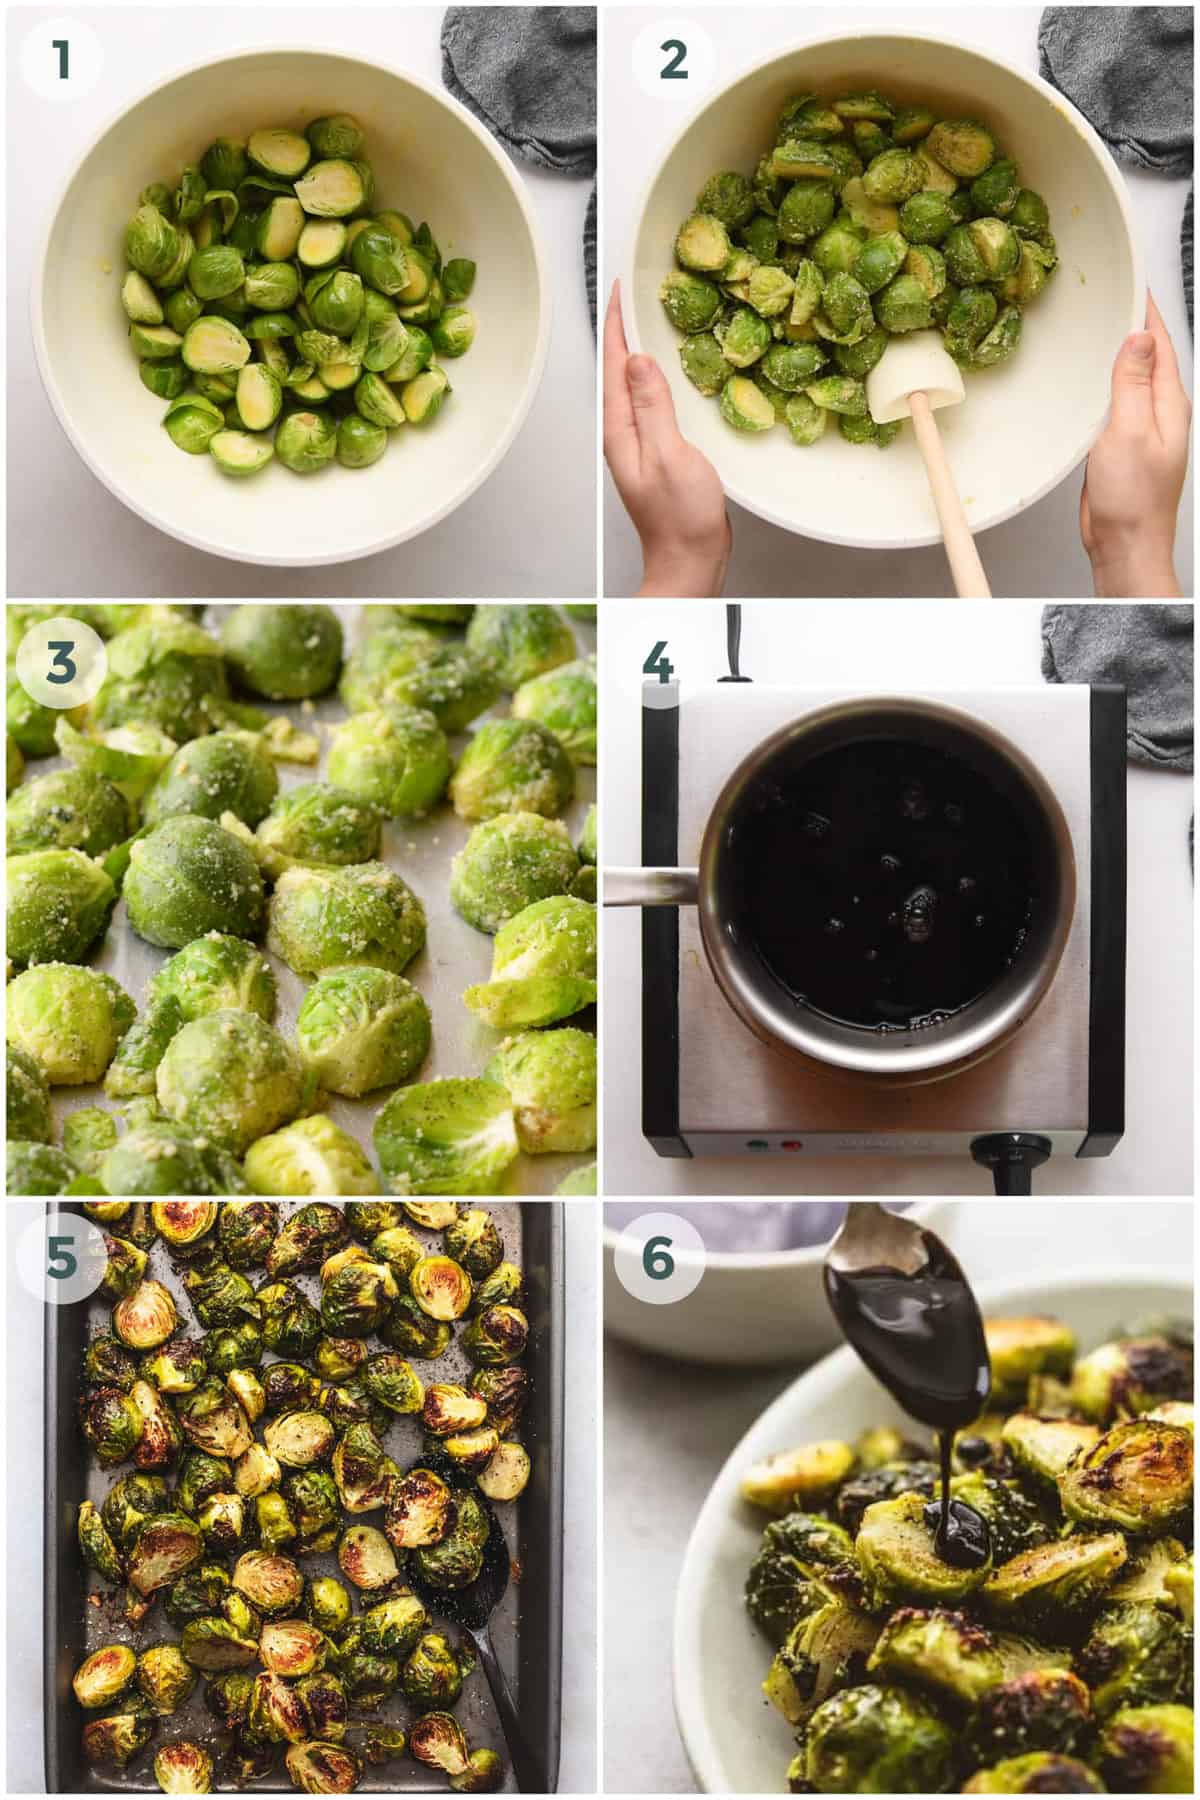 6 steps of preparing oven roasted brussels sprouts